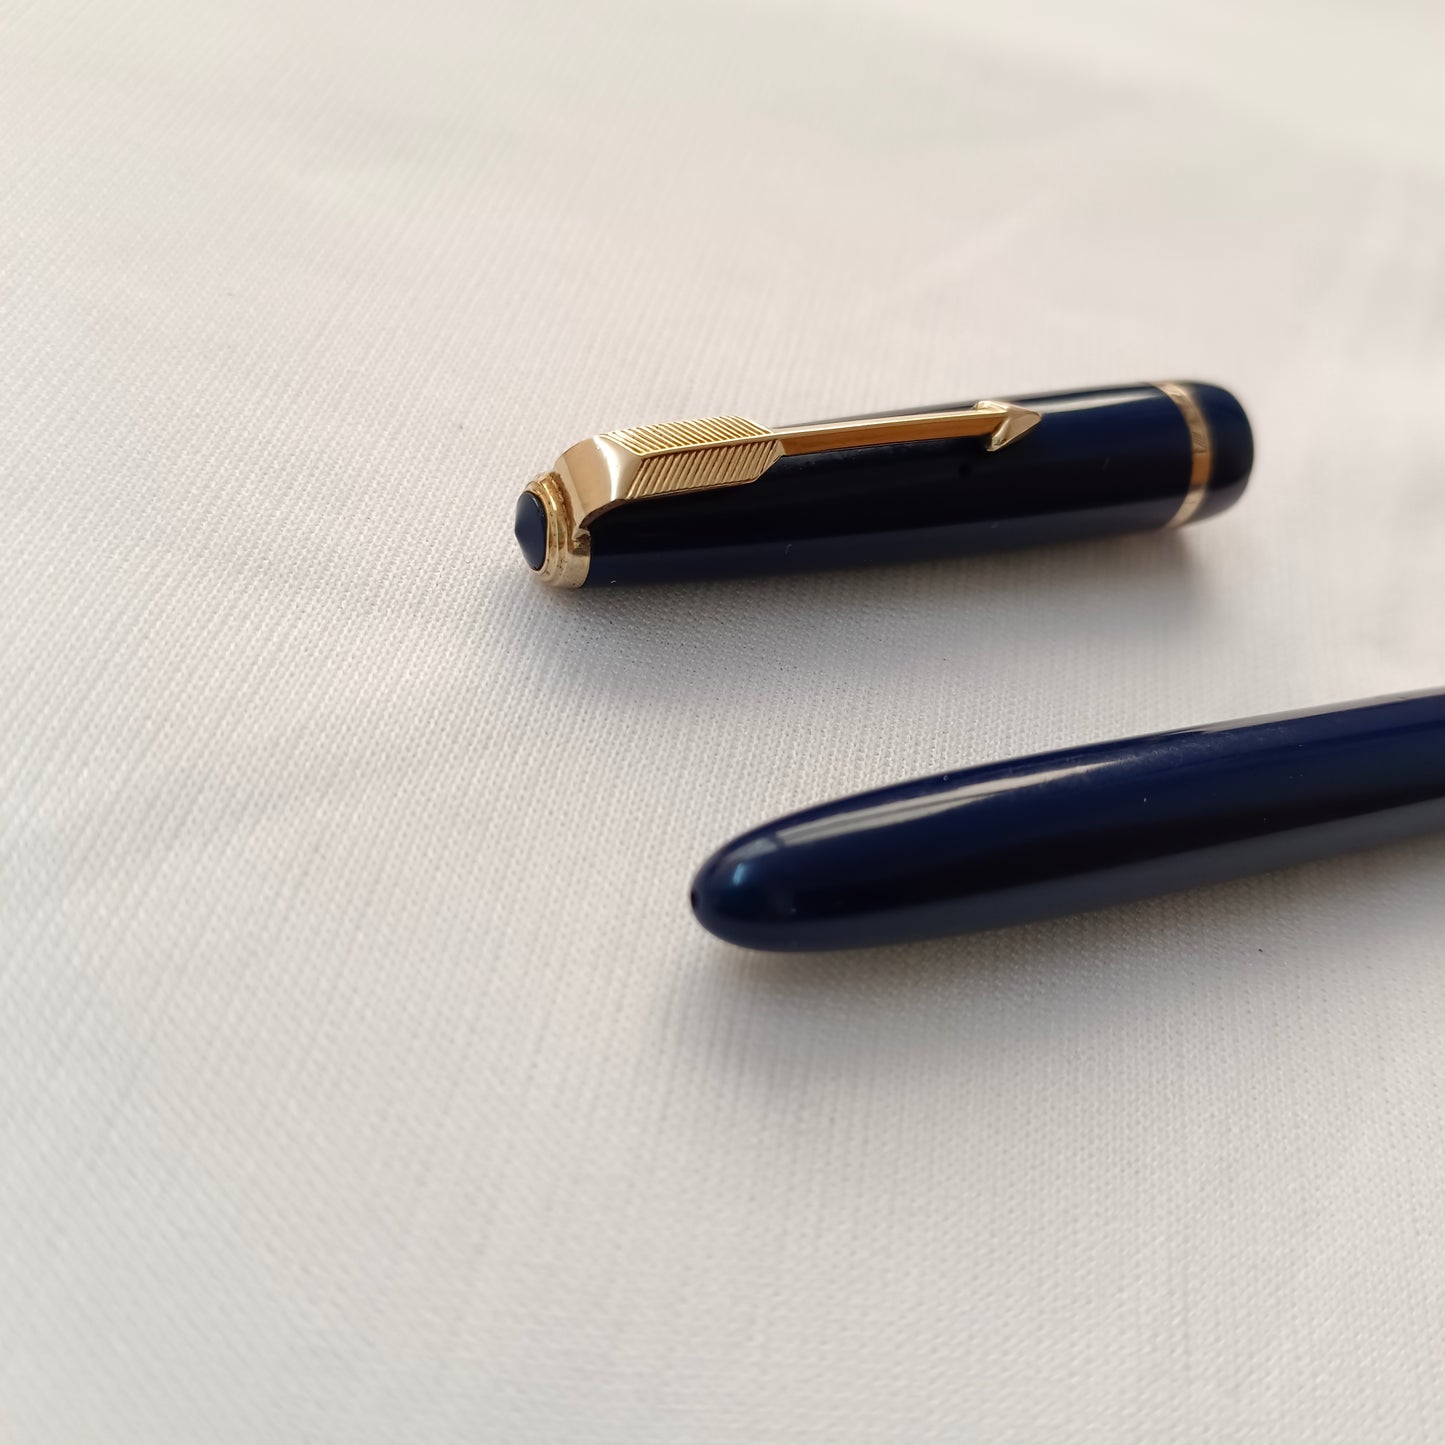 Parker Slimfold Duofold England (1950s/60s) - Blue w/Gold Trim Fountain Pen